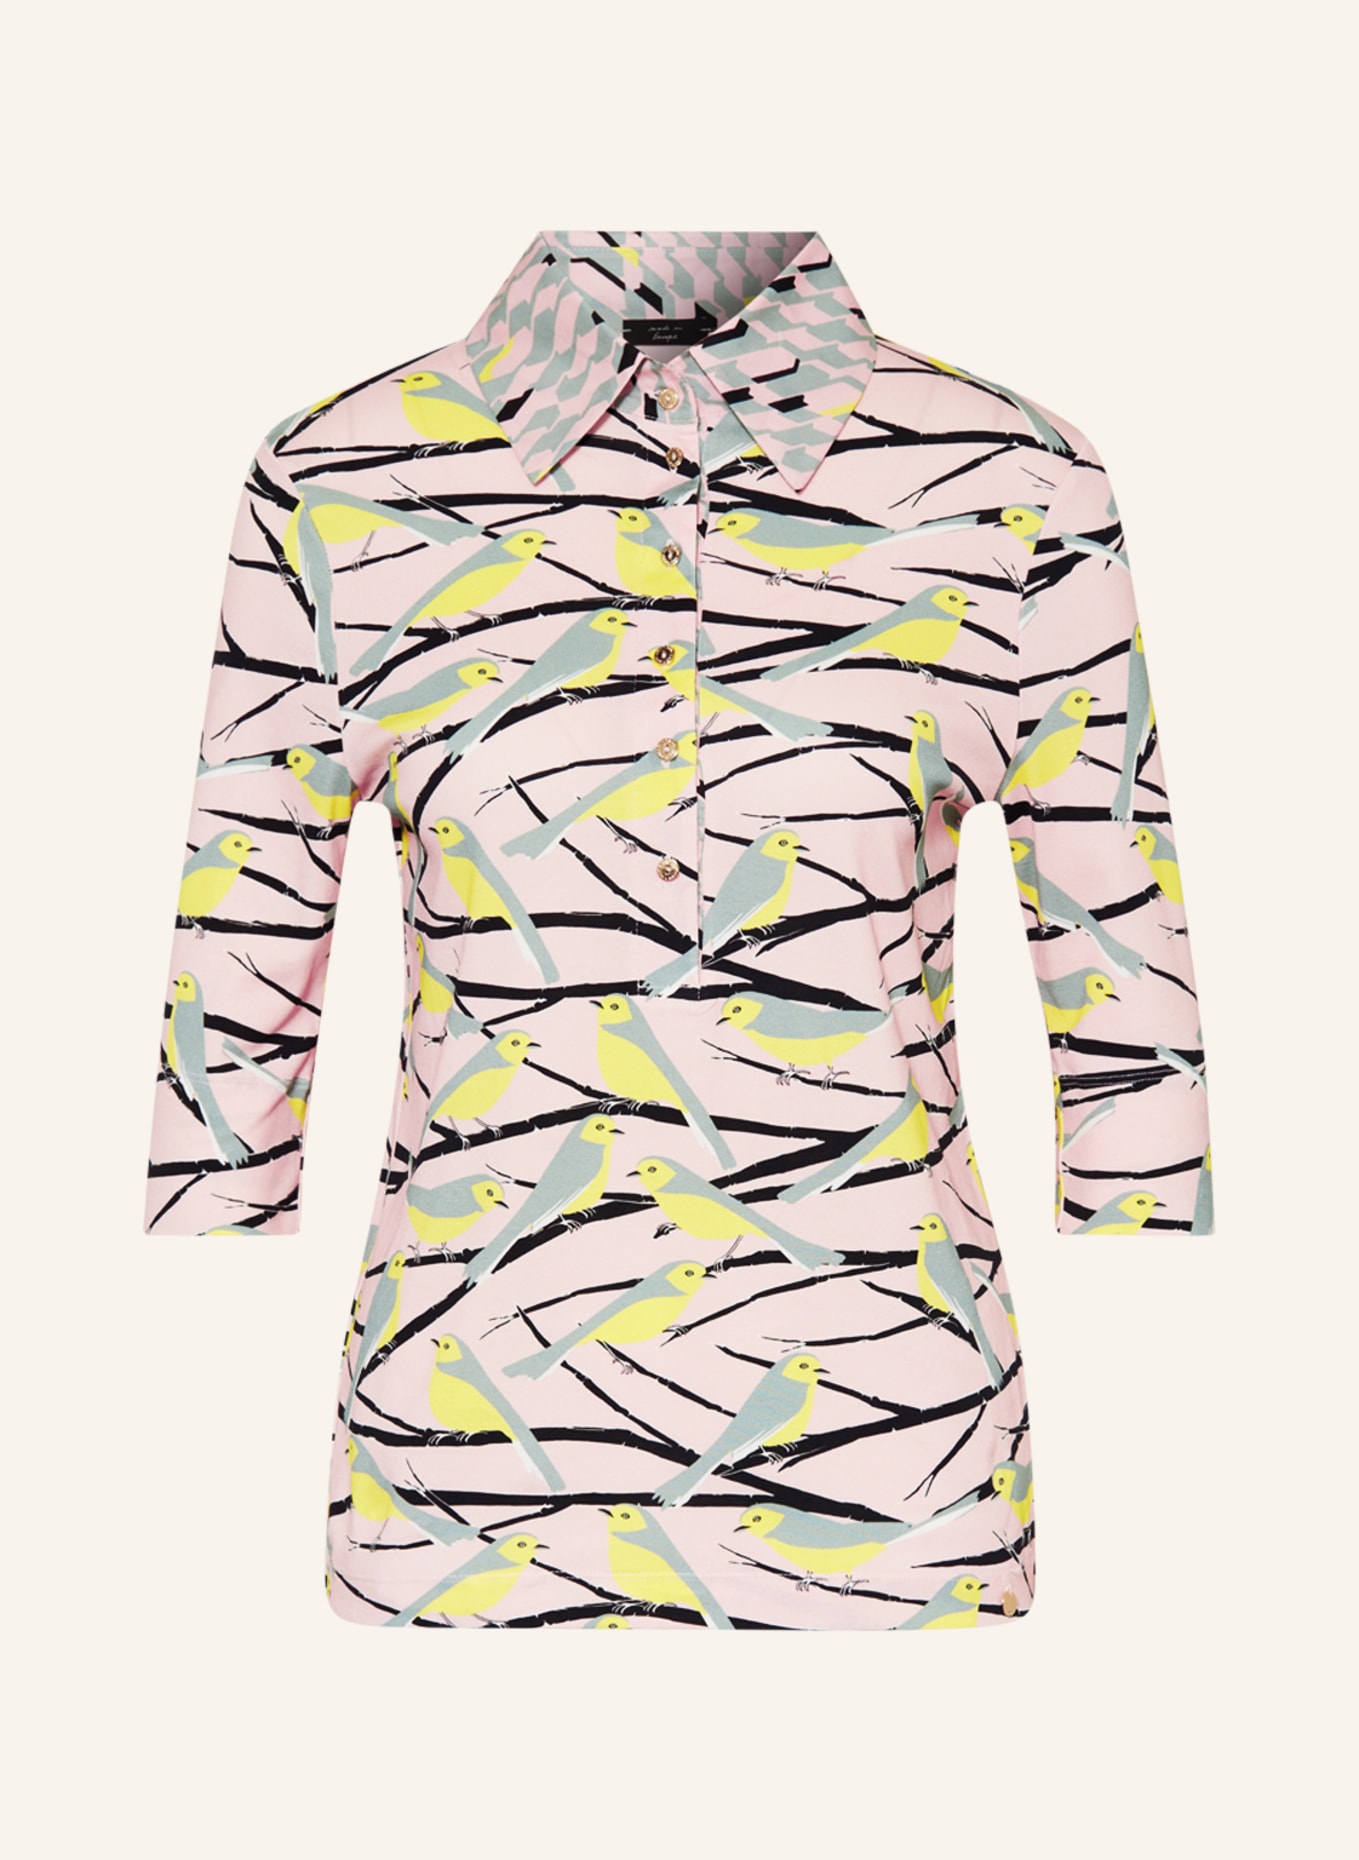 MARC CAIN Jersey polo shirt in light pink/ yellow/ blue gray